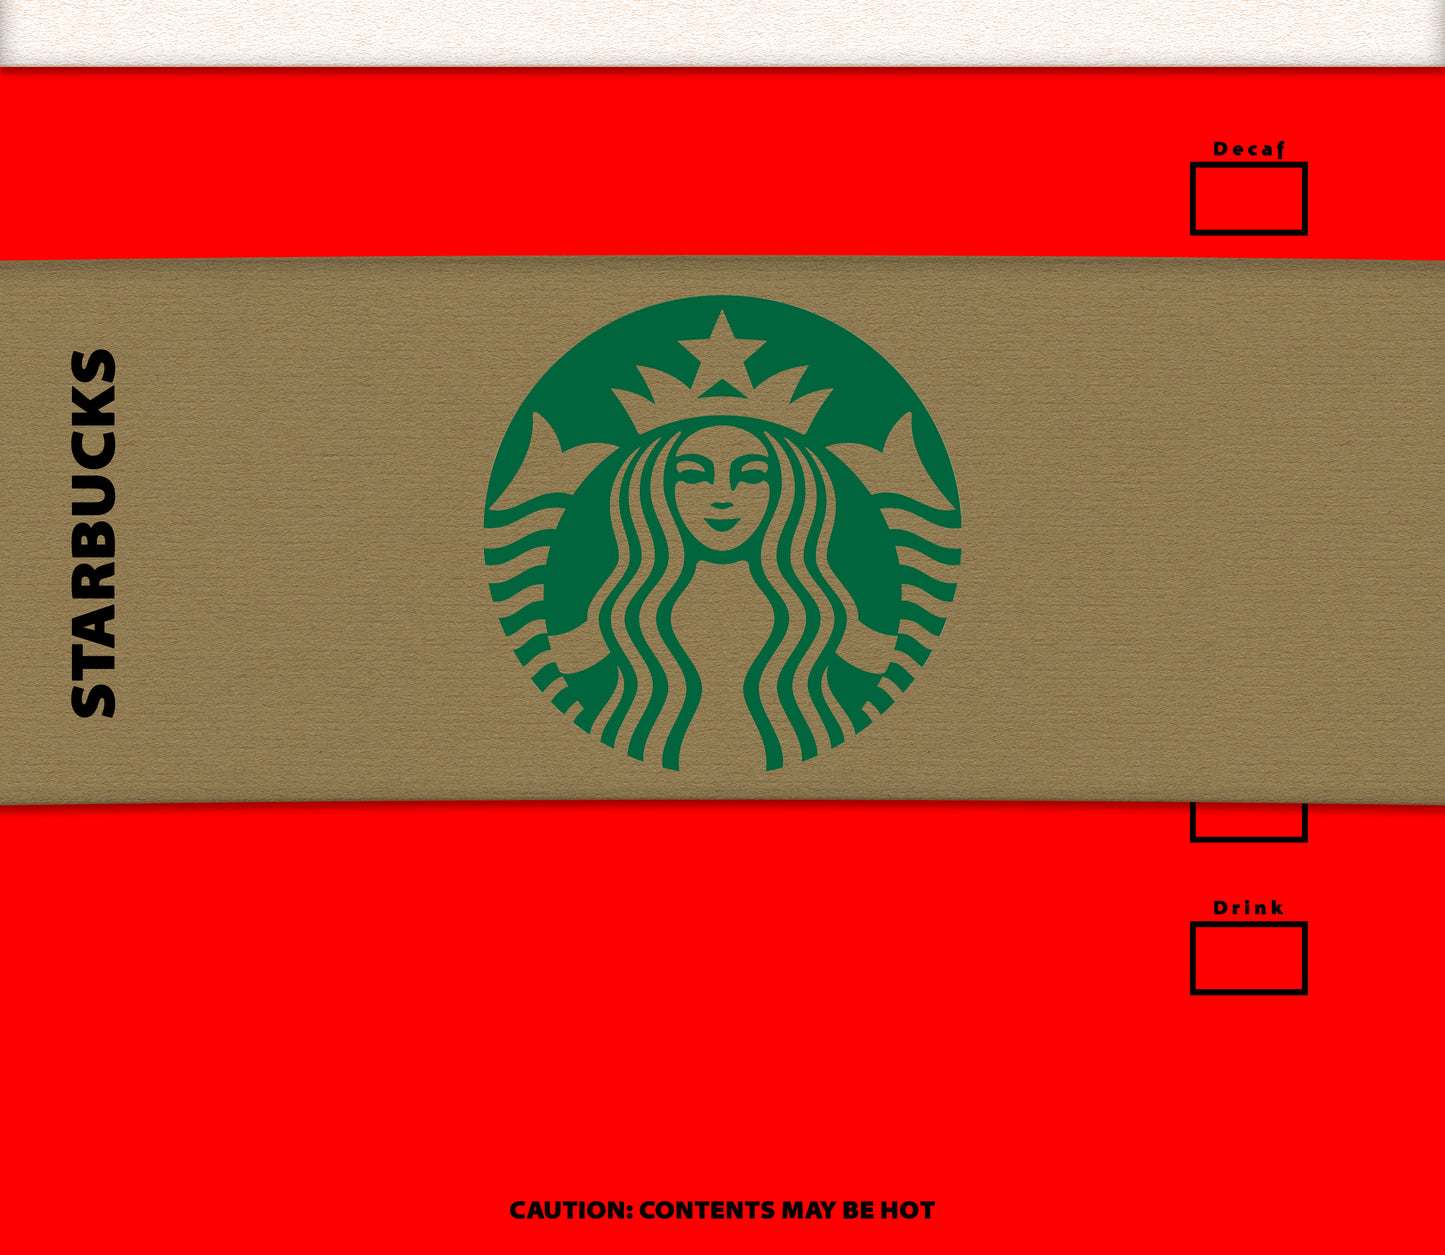 Starbucks Red Cup With Sleeve 20 oz. Tumbler